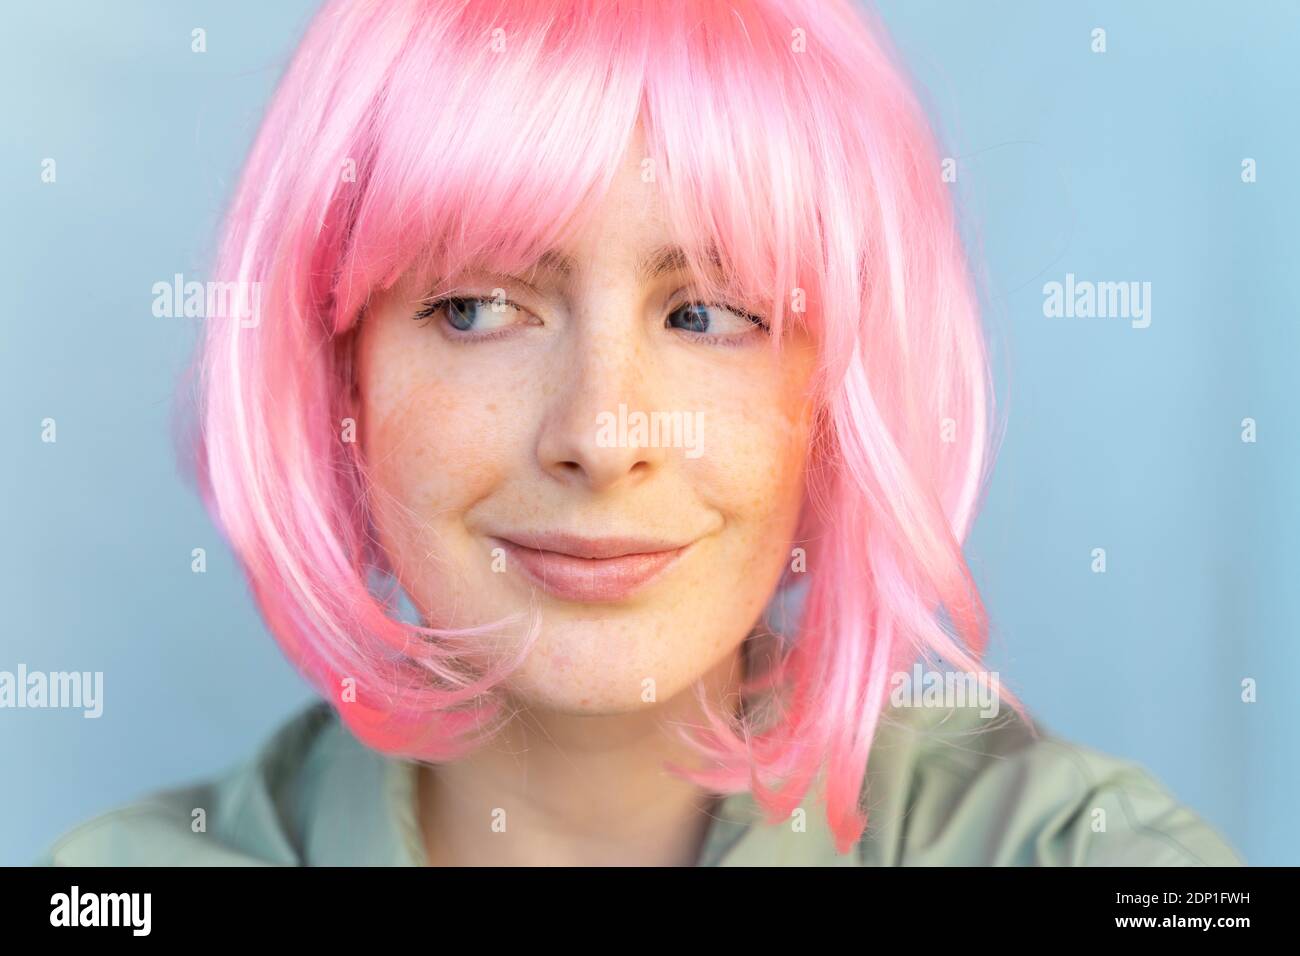 Portrait of young woman wearing pink wig glancing sideways Stock Photo